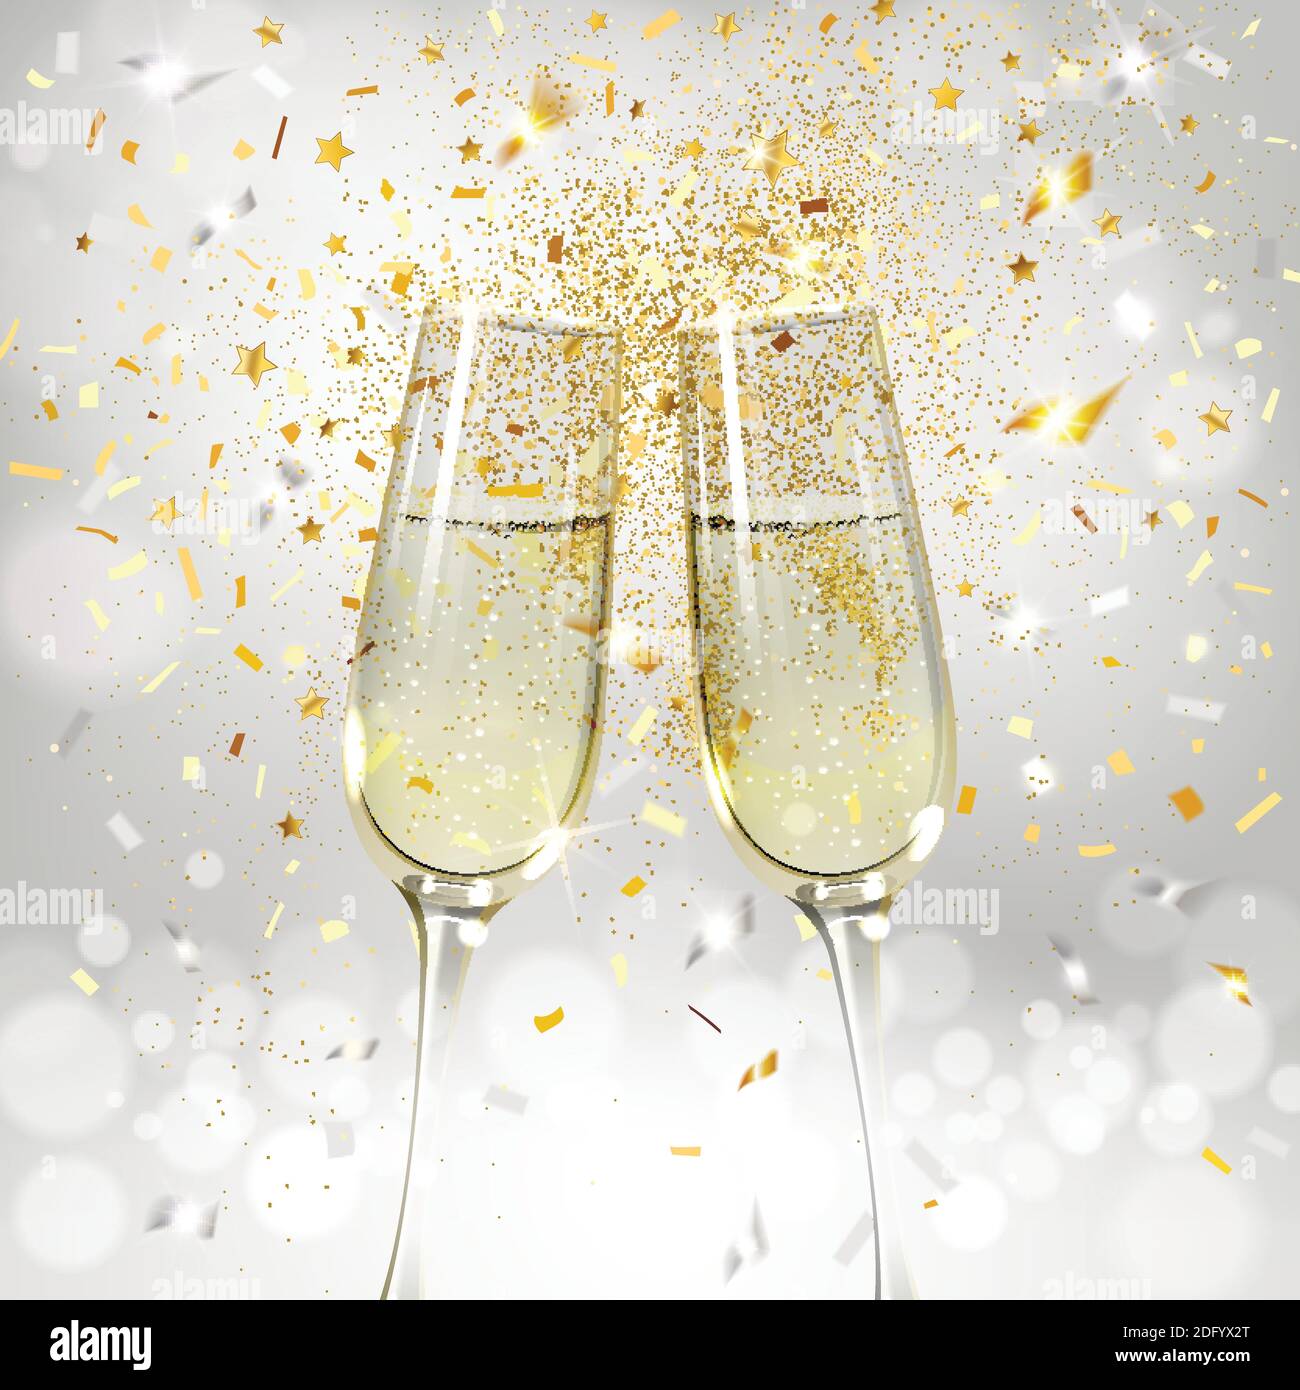 glasses with champagne on a background of gold and silver confetti Stock Vector